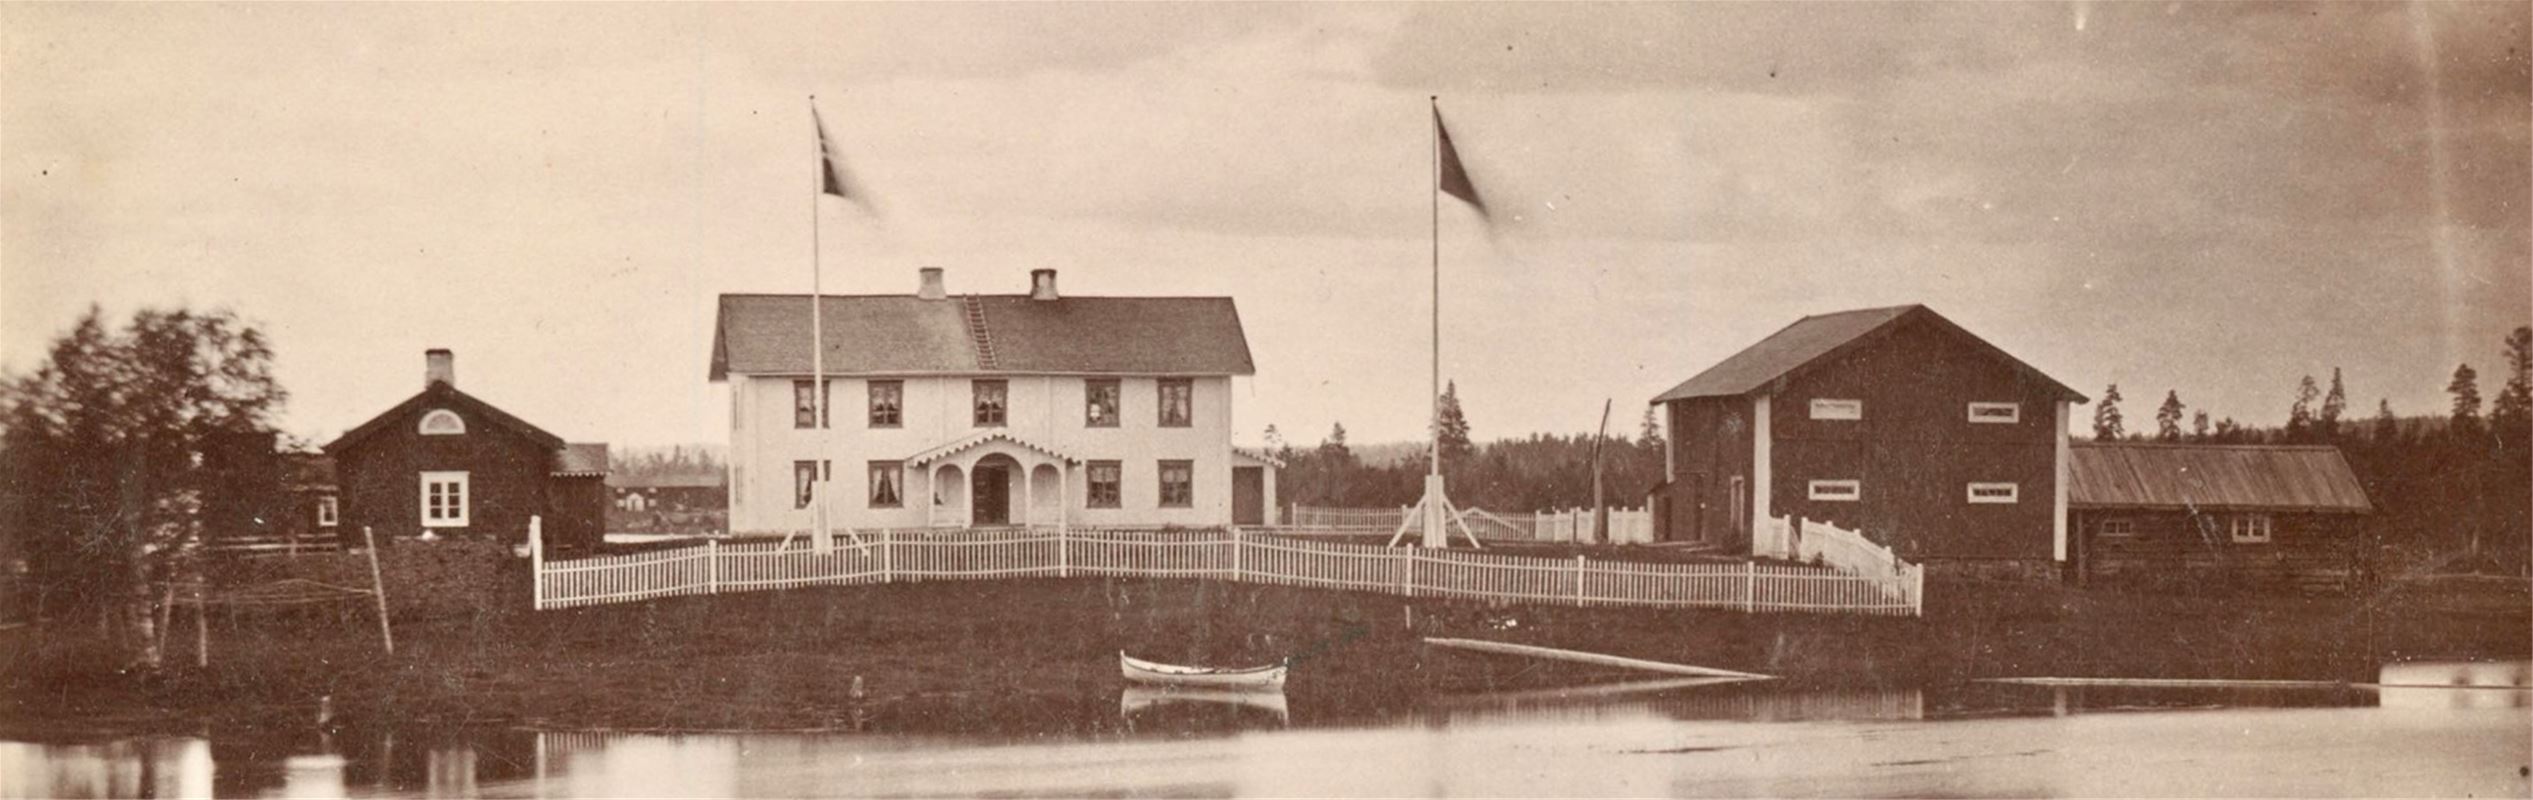 Old picture over the buildings and the river.